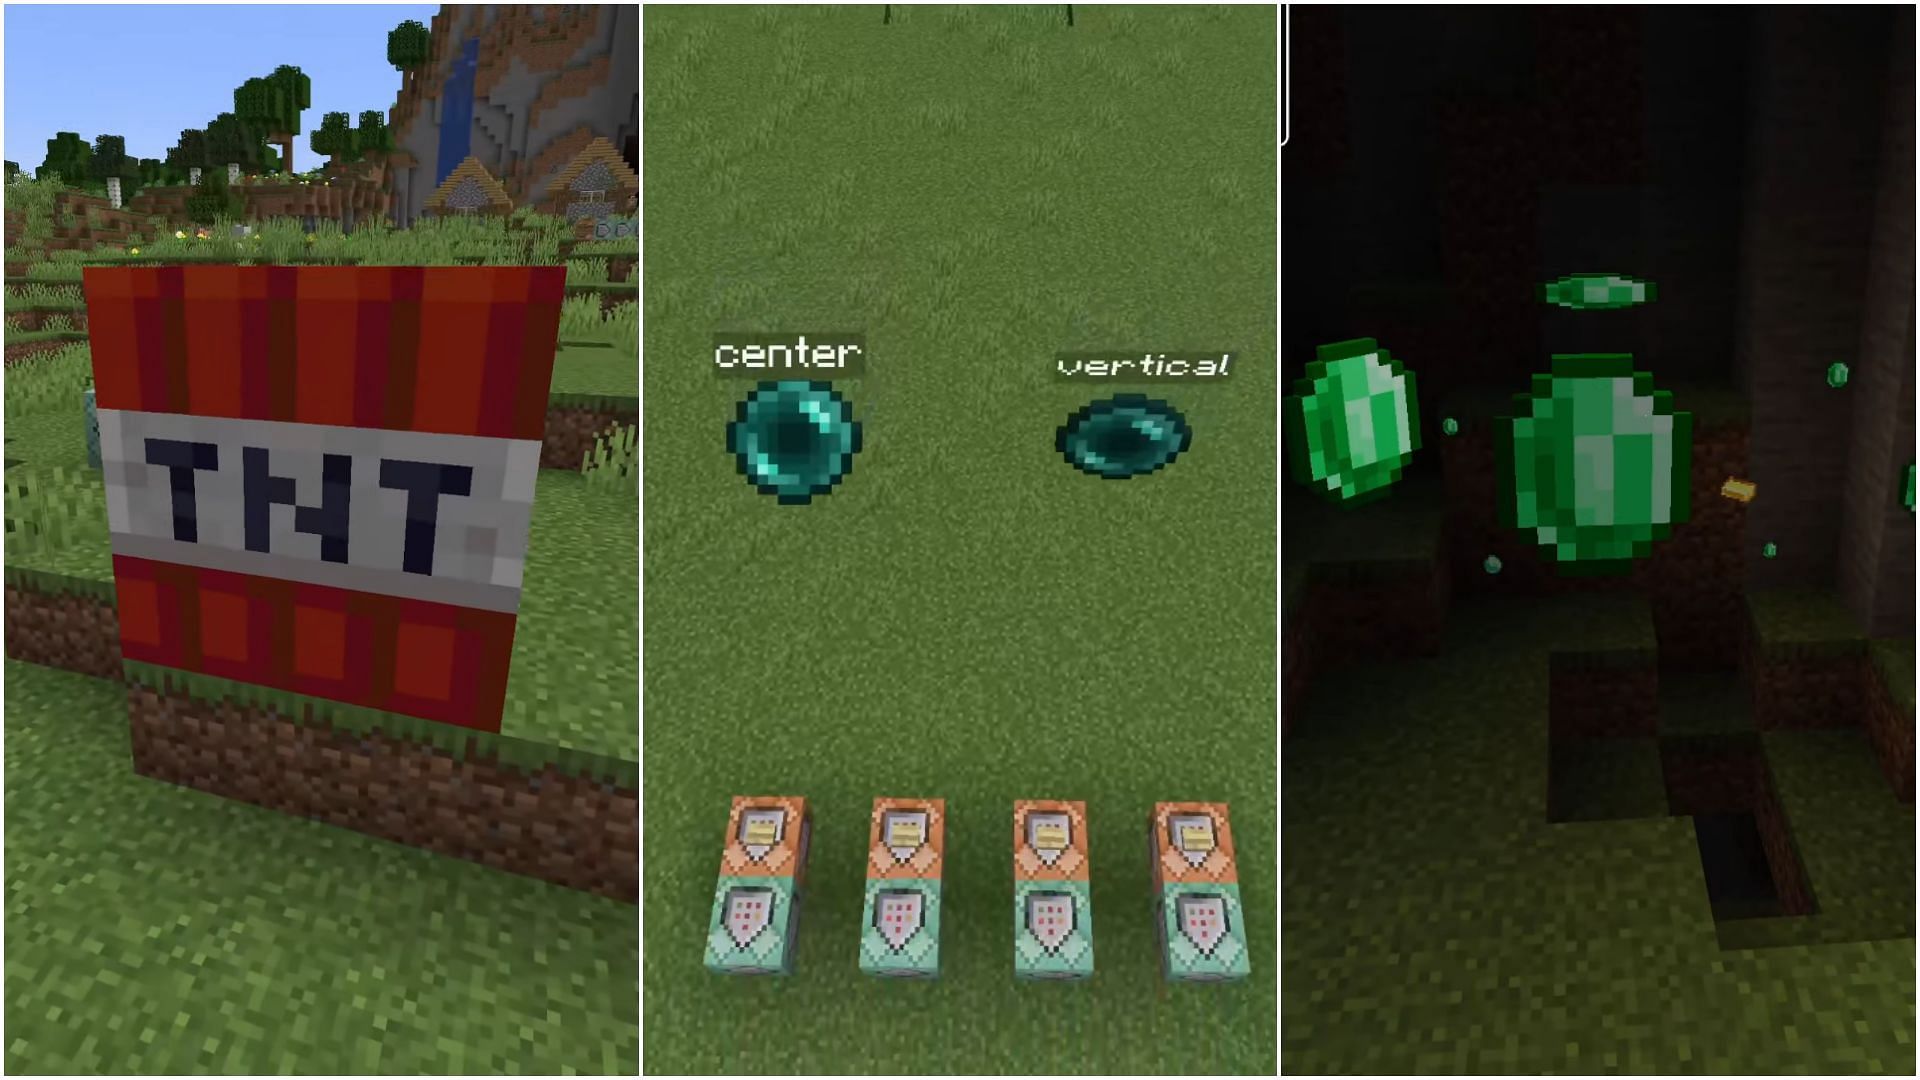 Players can alter the size, the rotation behavior, and the brightness and shadow levels of display entities in Minecraft as well (Image via Mojang)